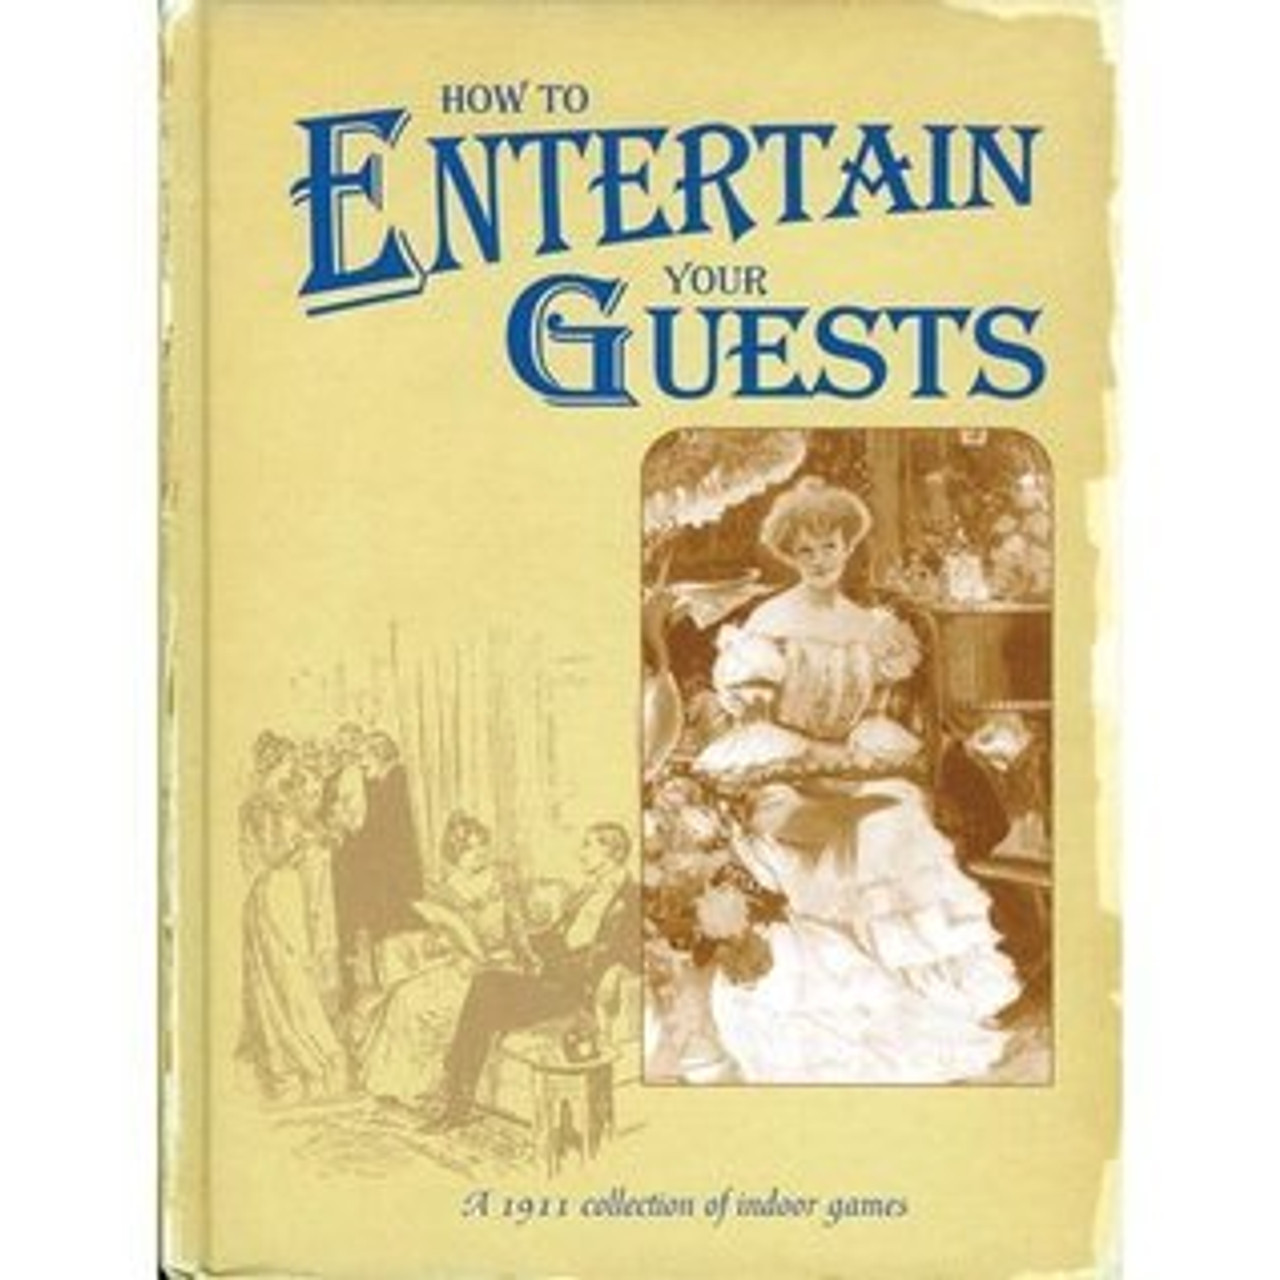 Dorothy Dickinson / How to Entertain Your Guests (Hardback)